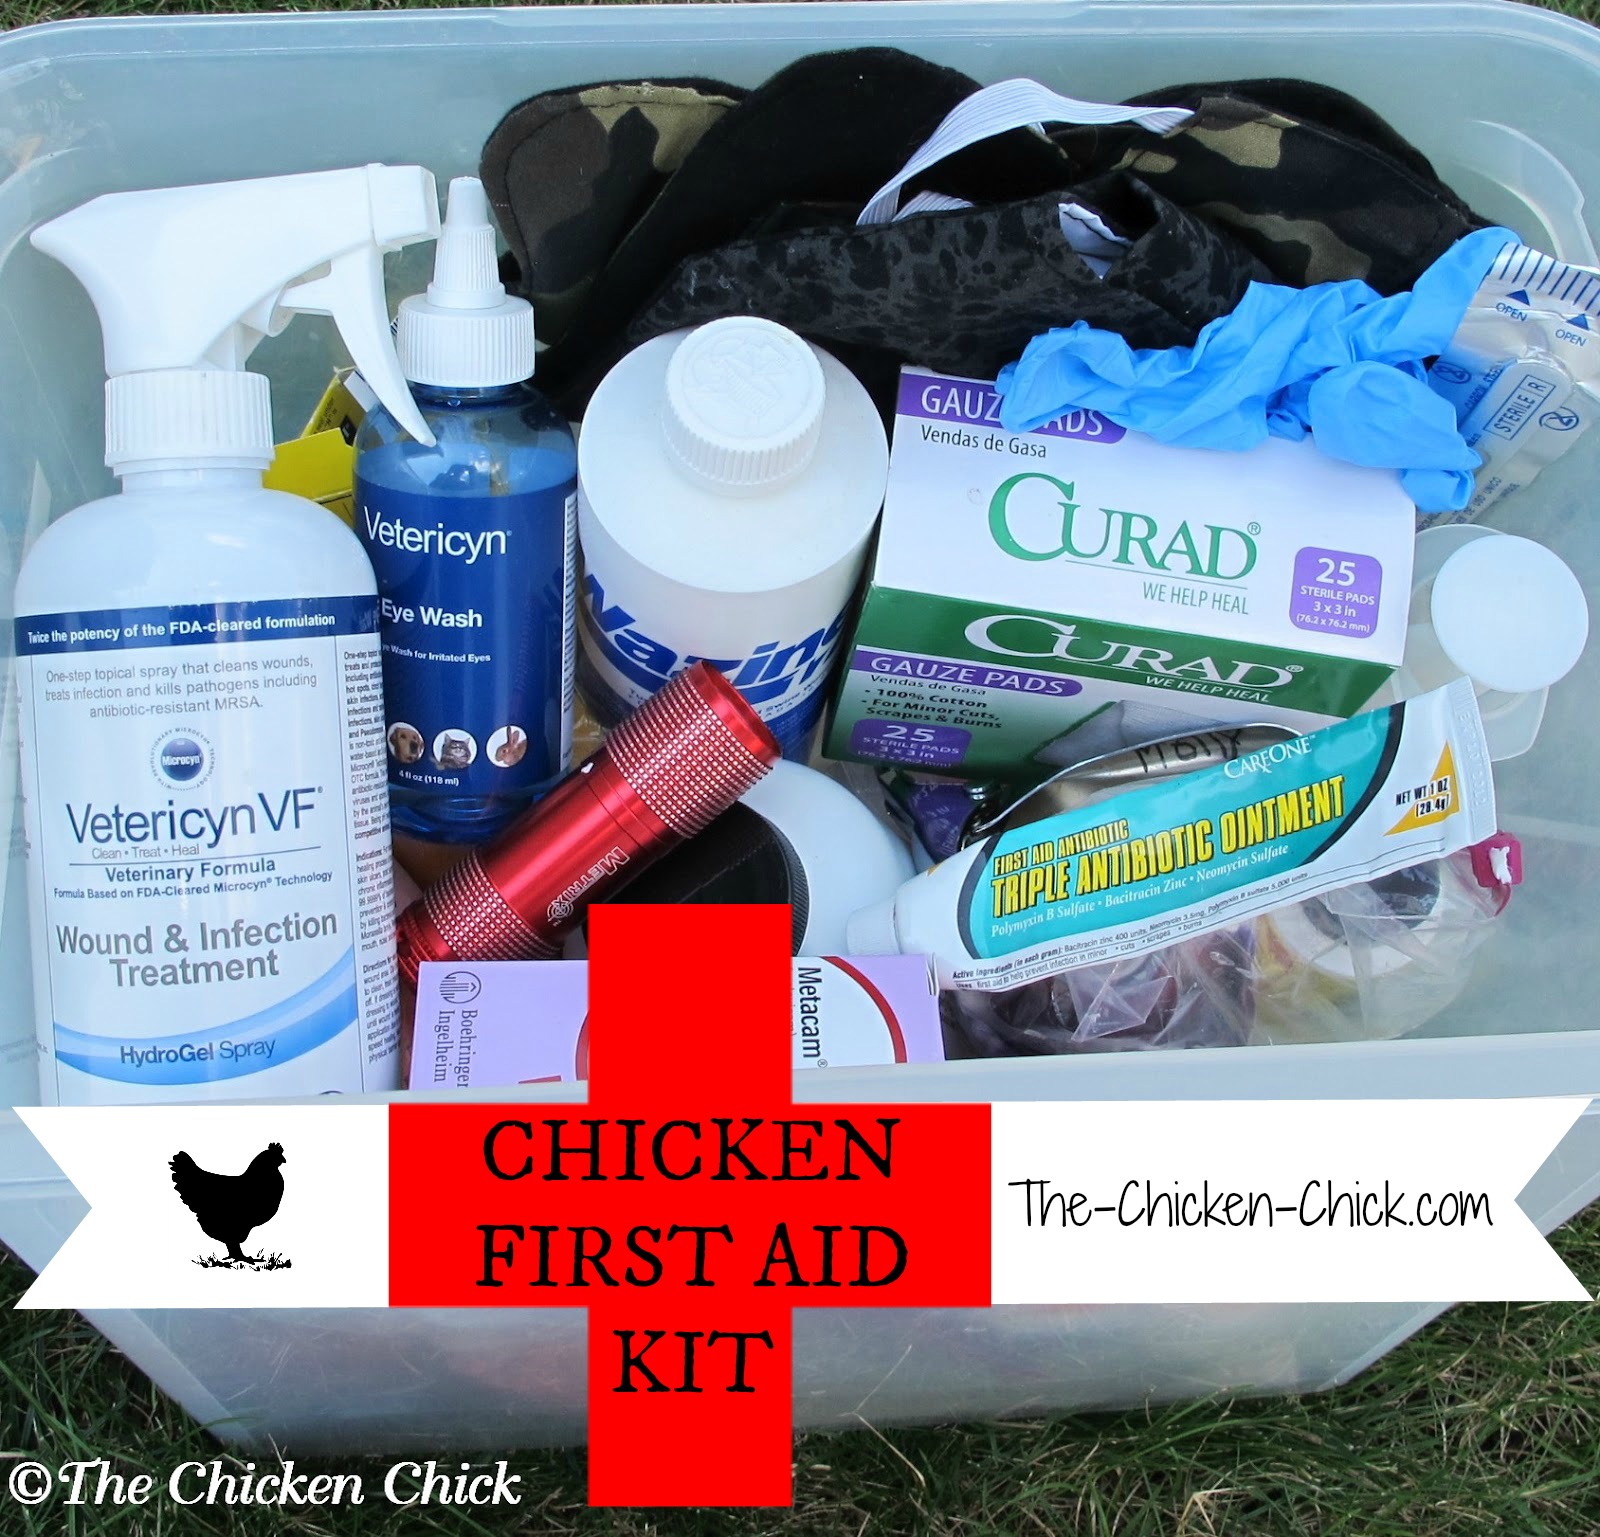 Chicken First Aid Kit: Why You Need One